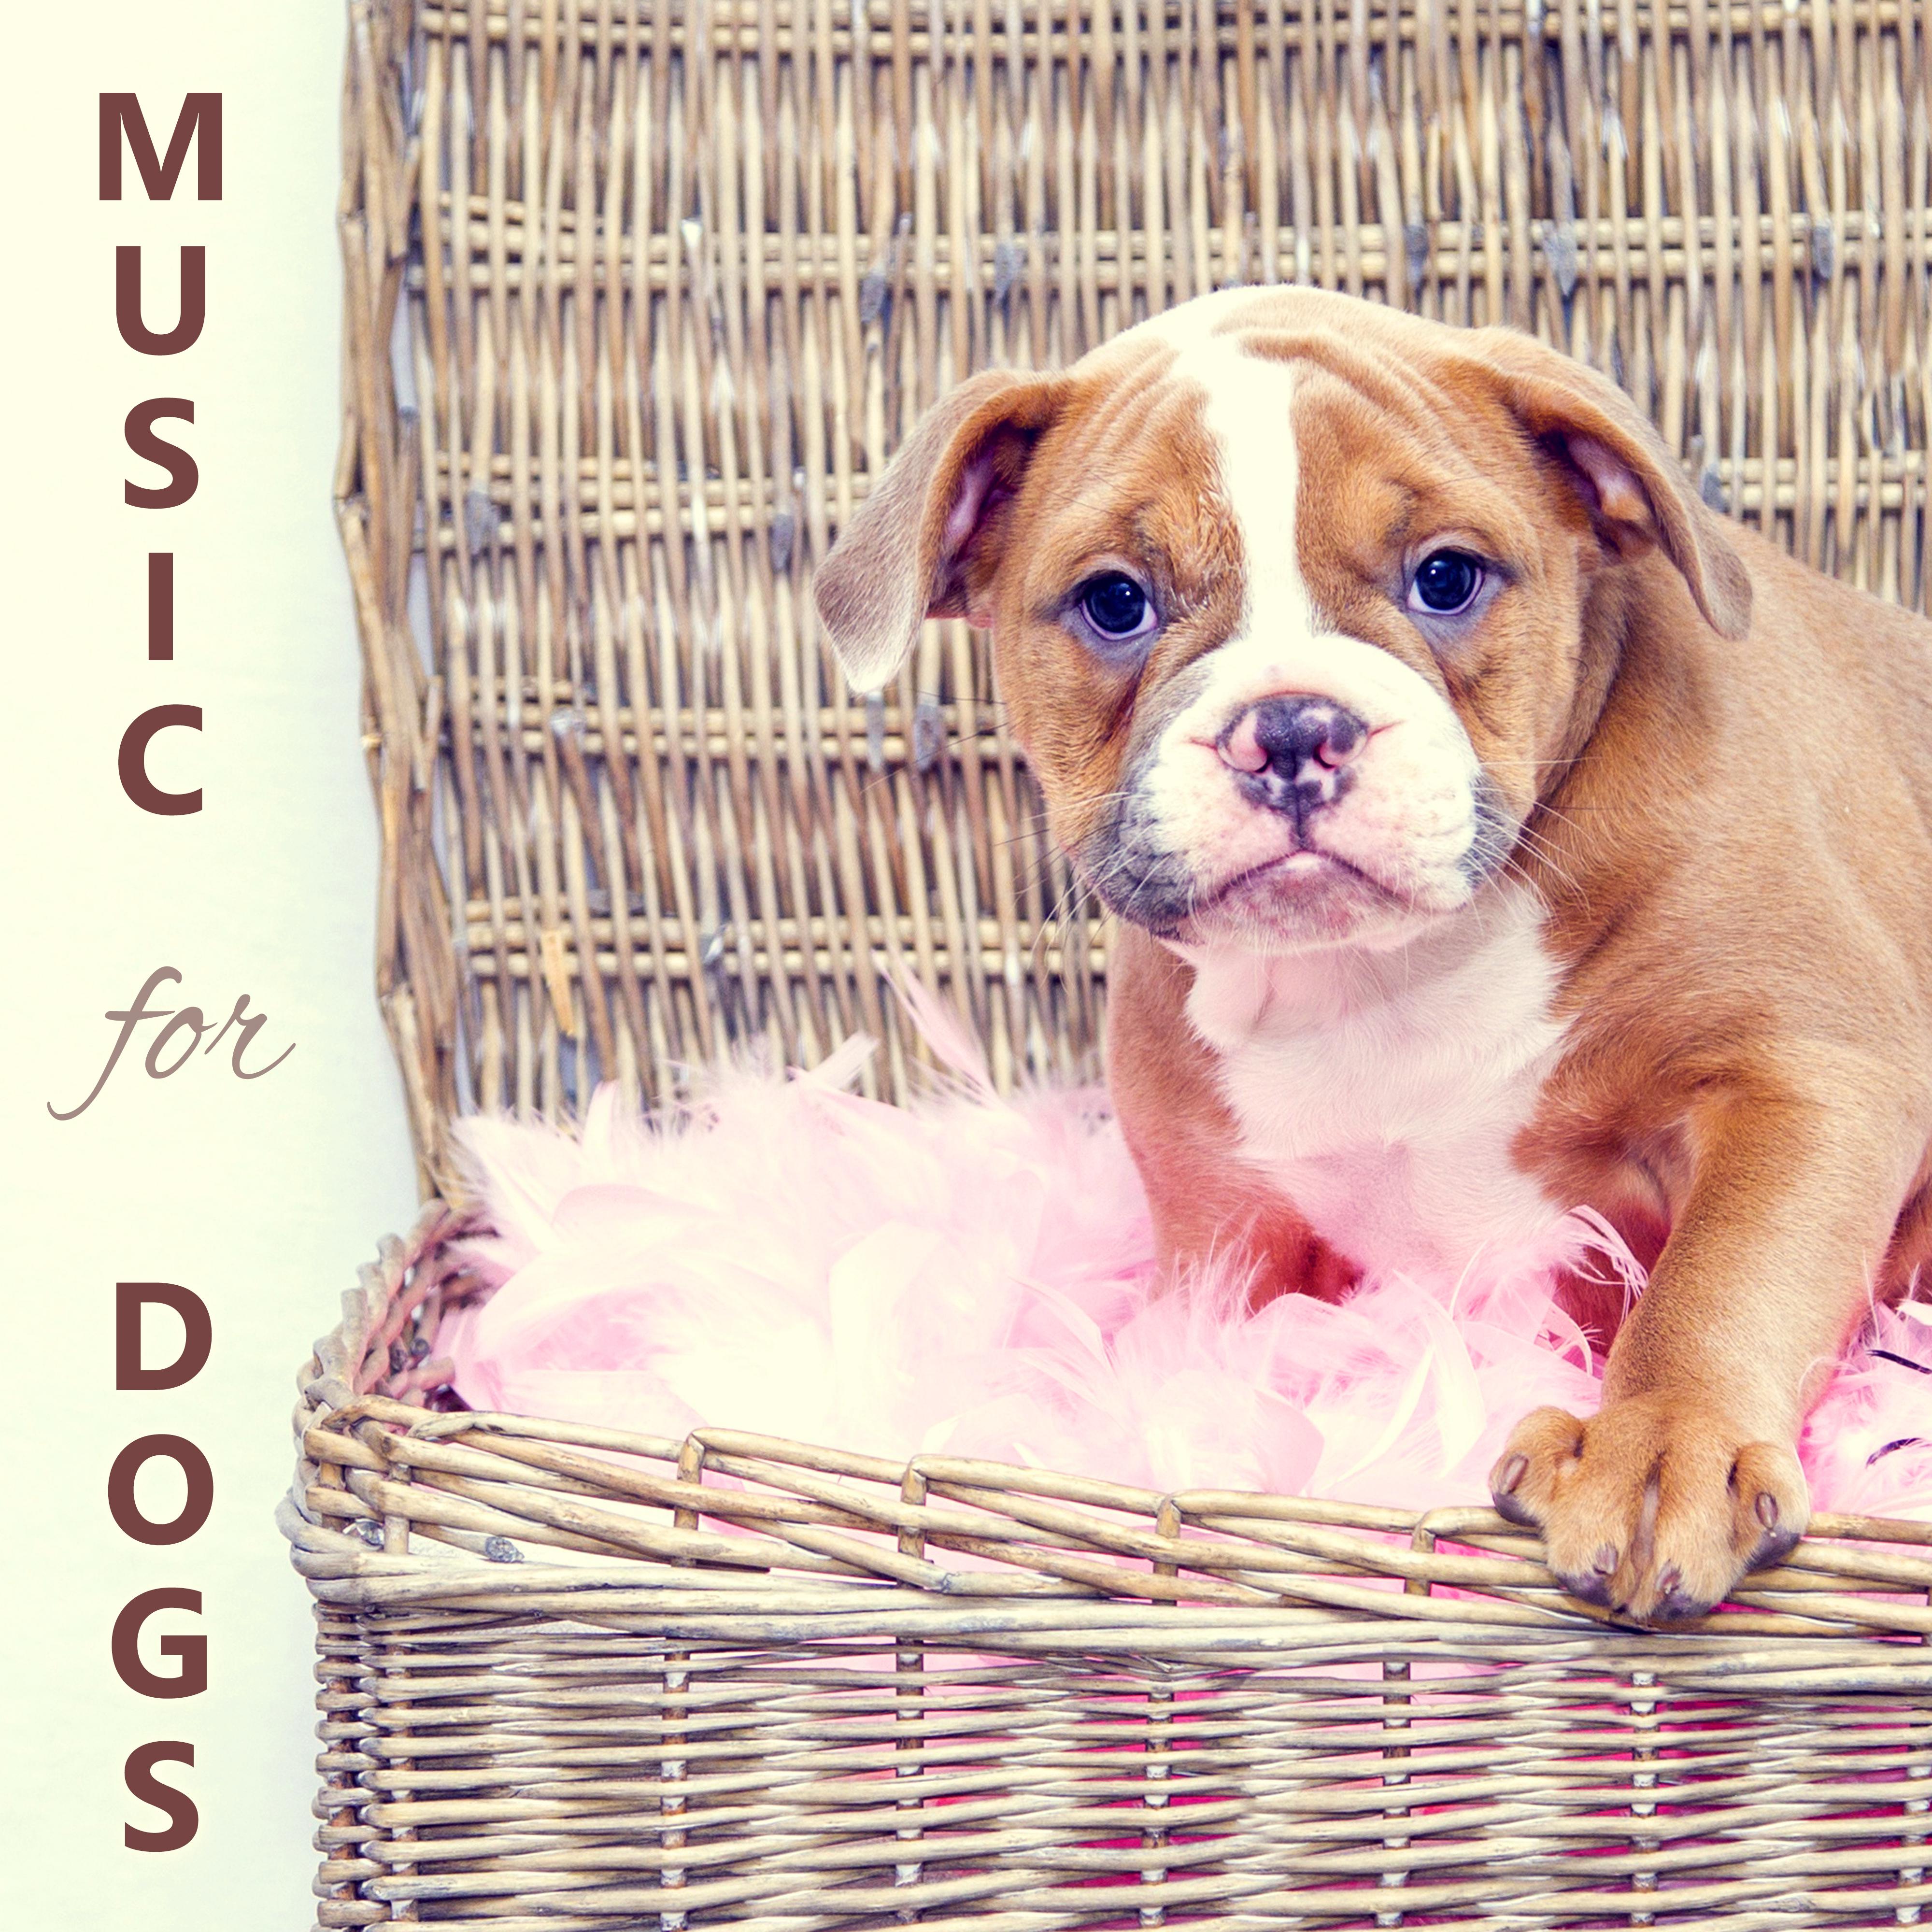 Music for Dogs  Relax, Calm Down, Stress Relief, Pet Relaxation, Sleep Aids, Music Therapy for Dogs, Meditation, Happiness, Nature Sounds, Calming Music